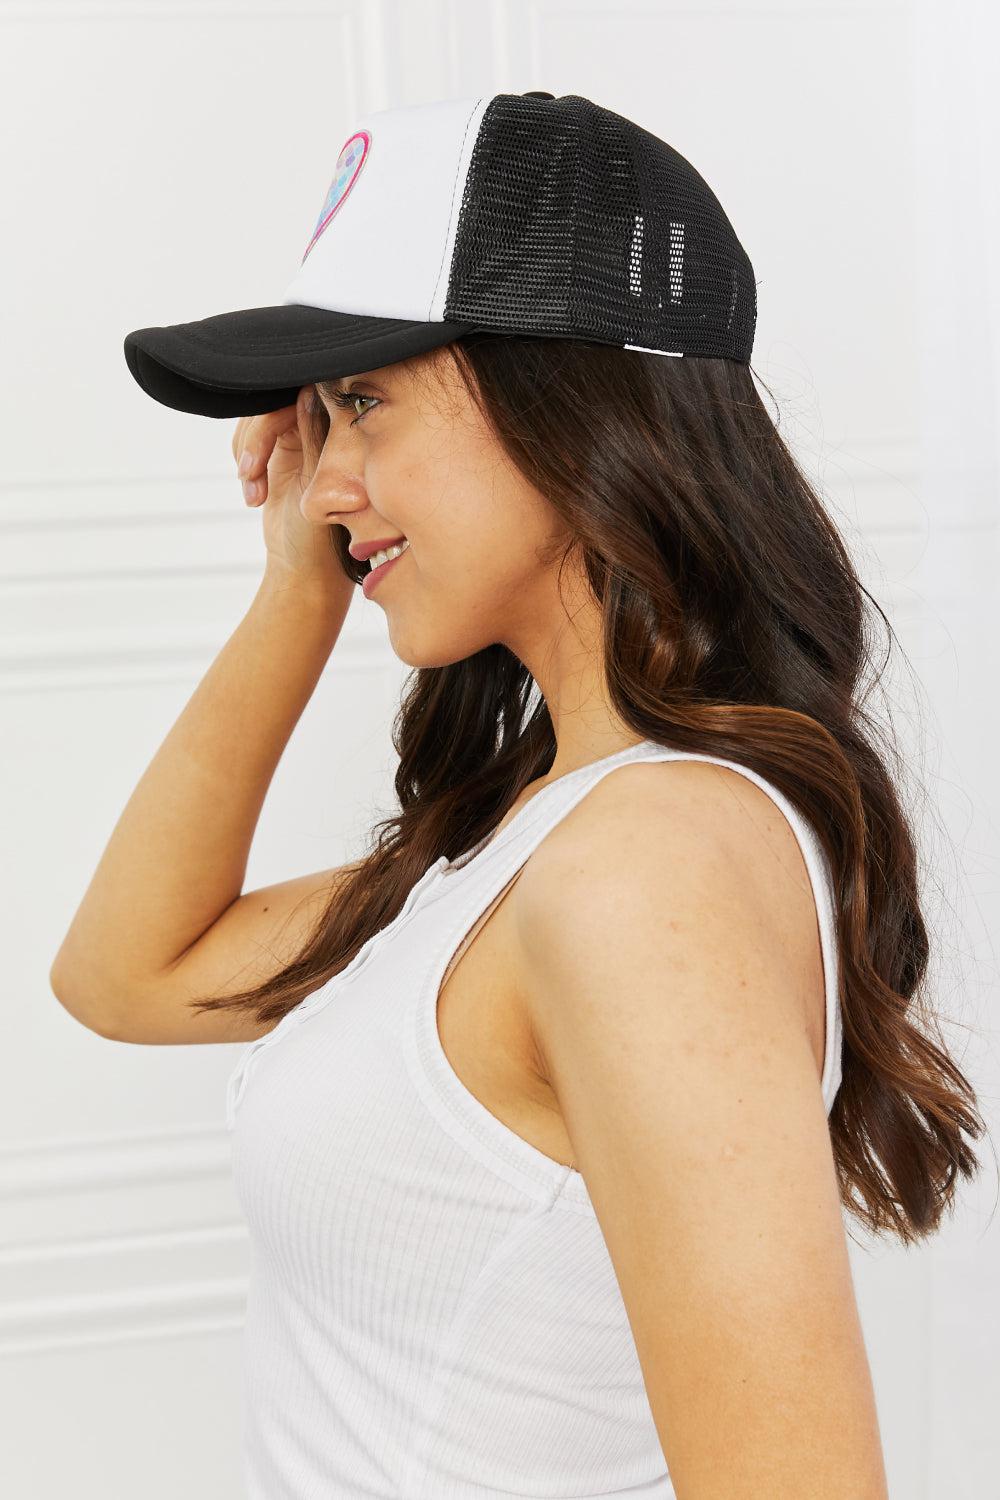 Fame Falling For You Trucker Hat in Black BLUE ZONE PLANET